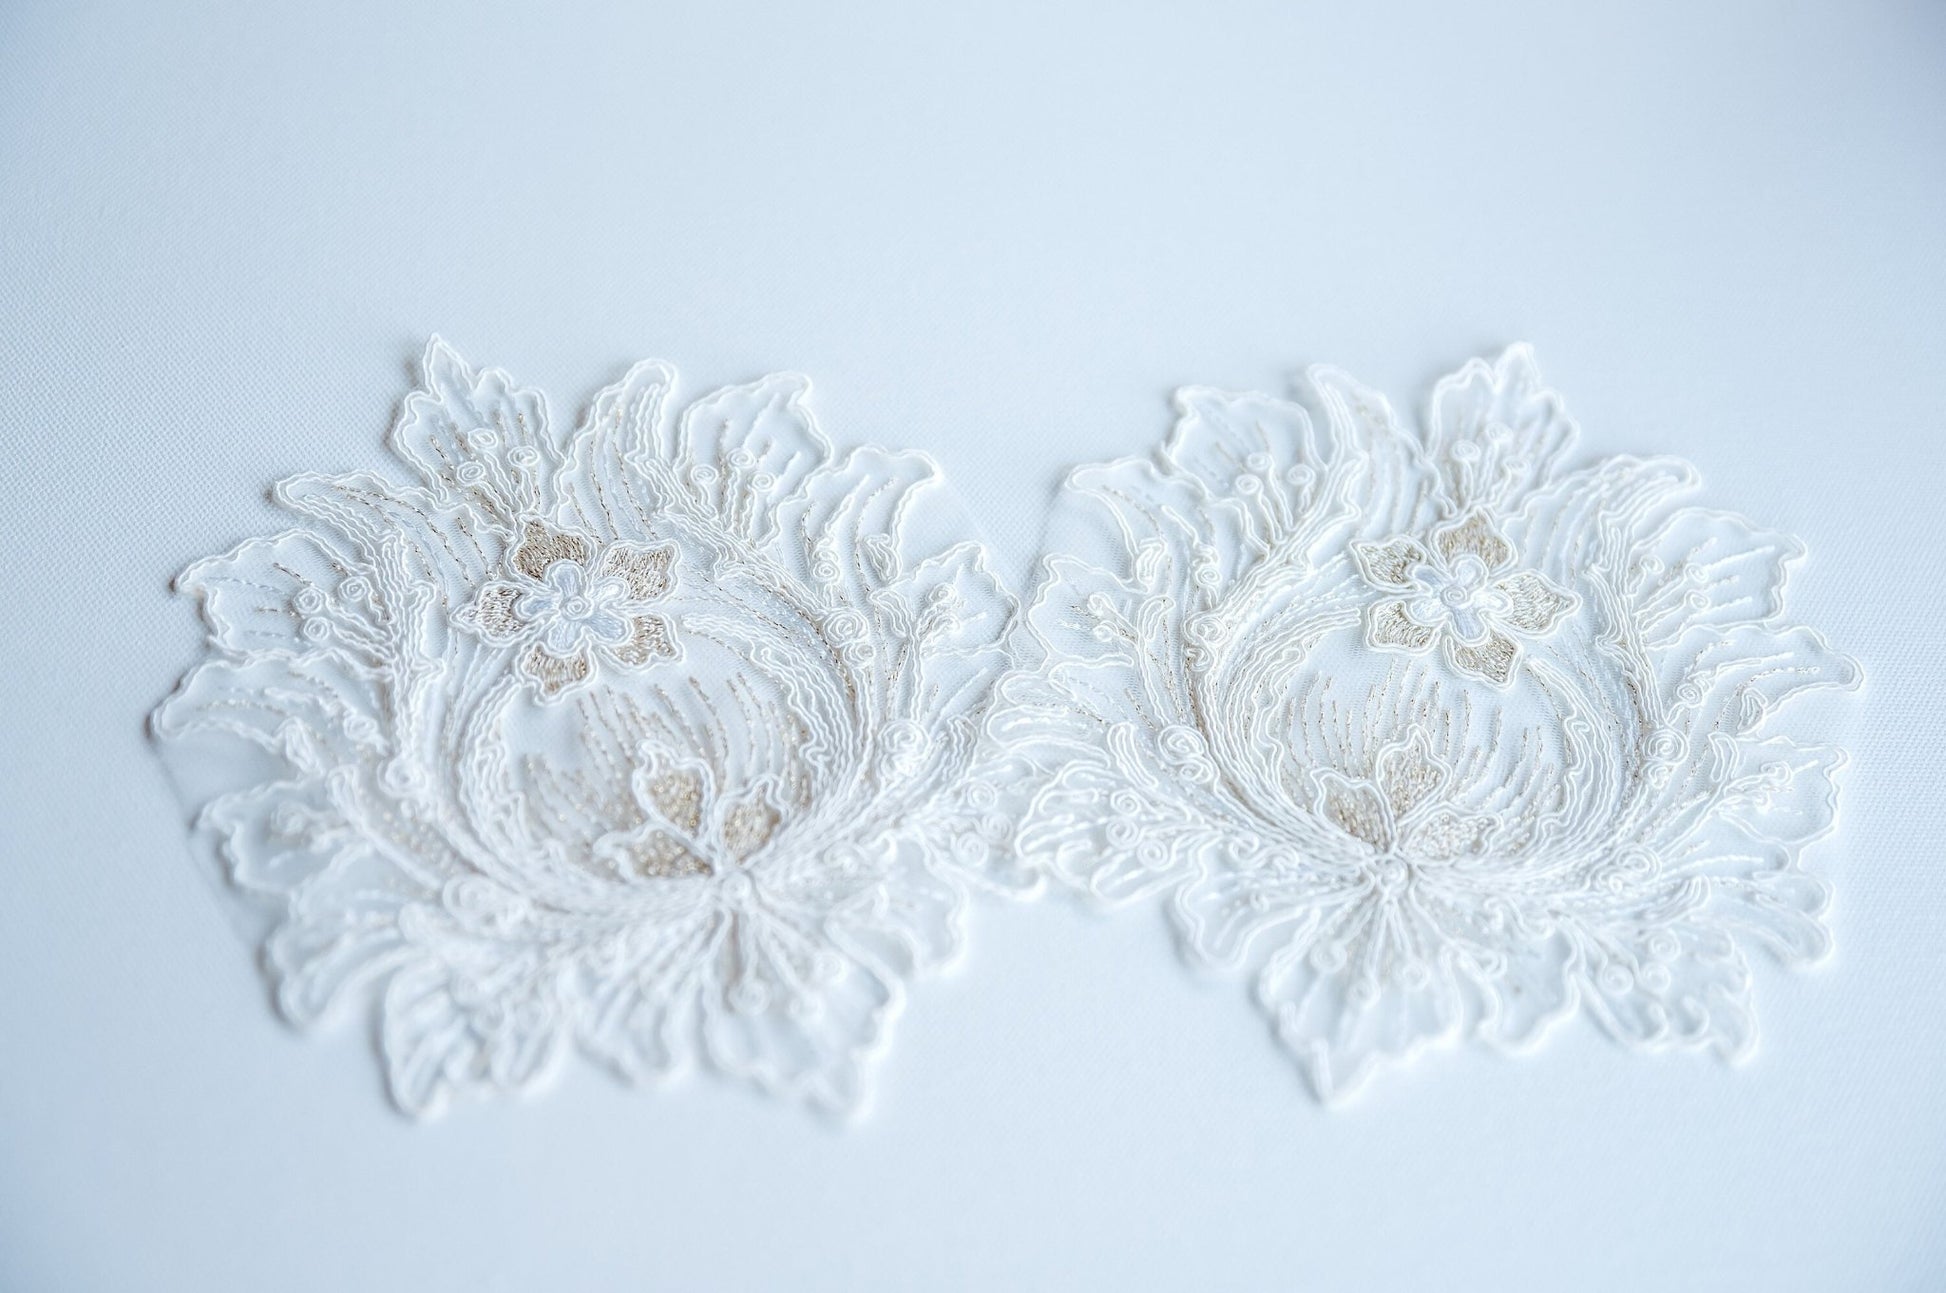 Flower Lace Cocktail Napkins - Hemsin Atelier